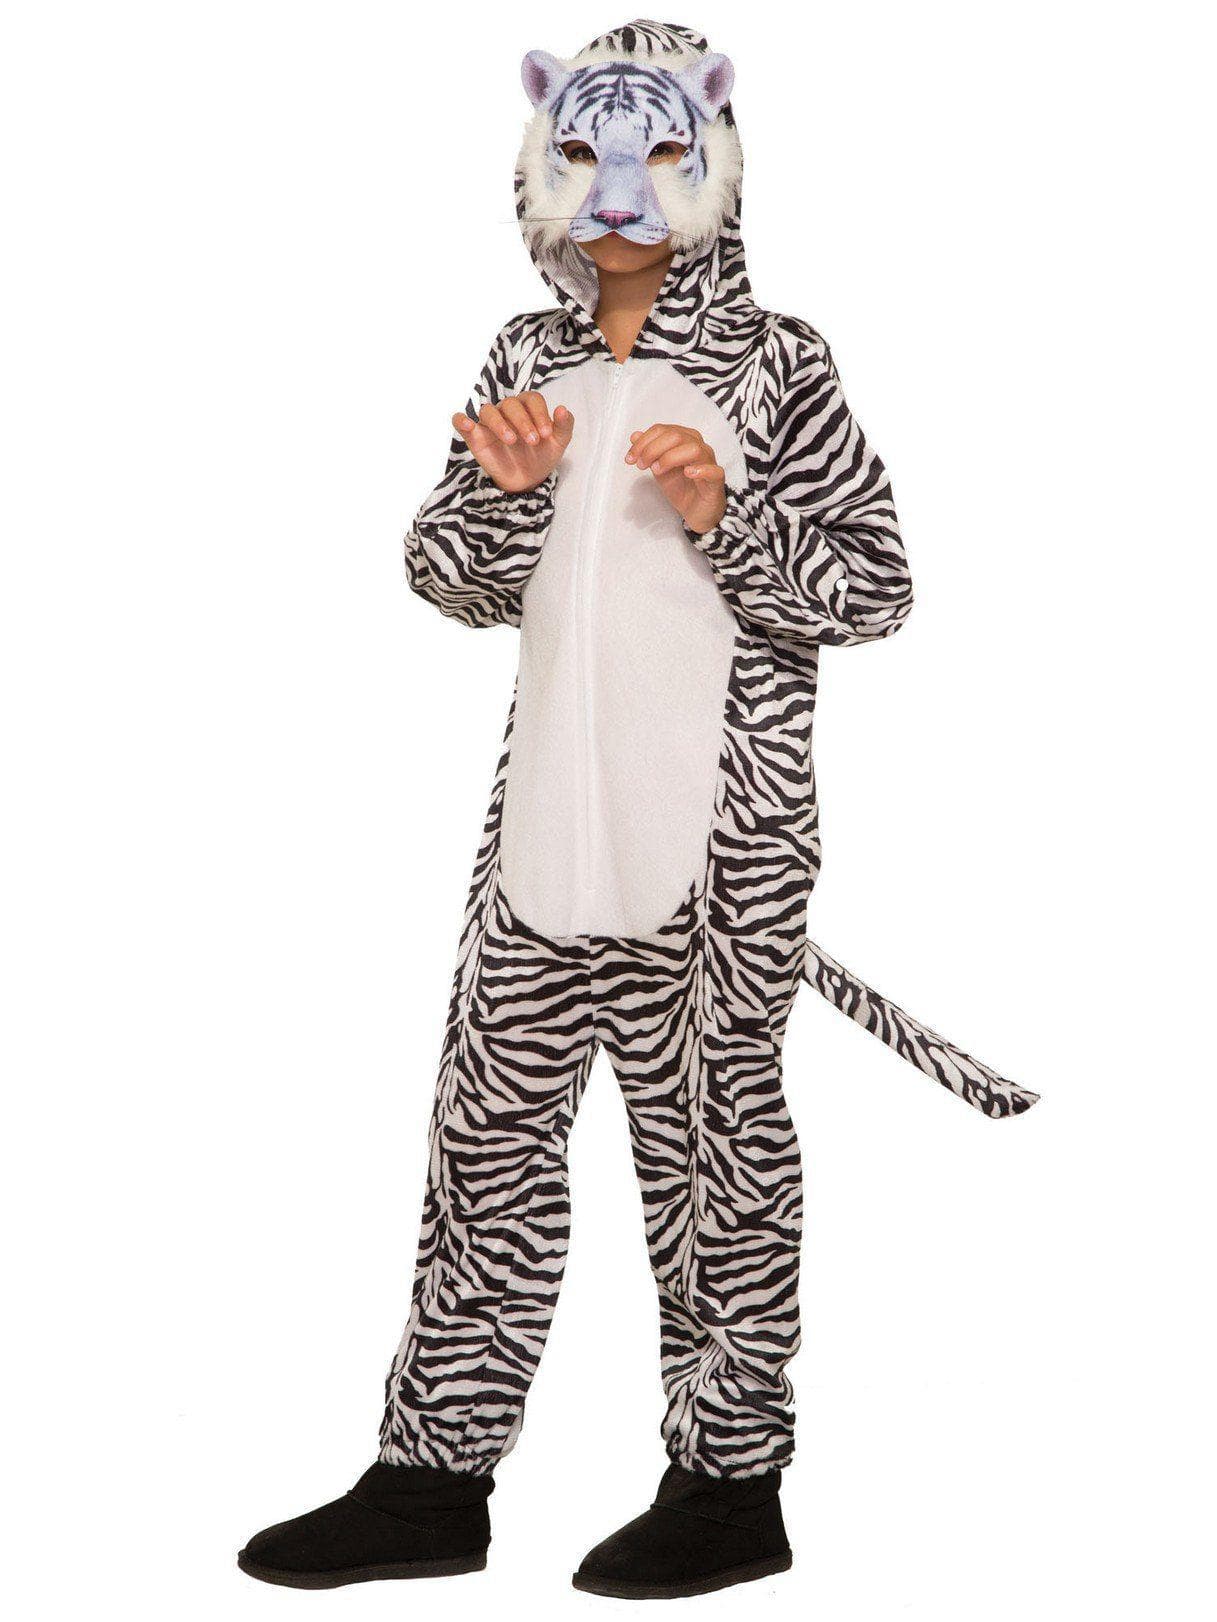 Kid's White tiger Jumpsuit With Mask Costume - costumes.com